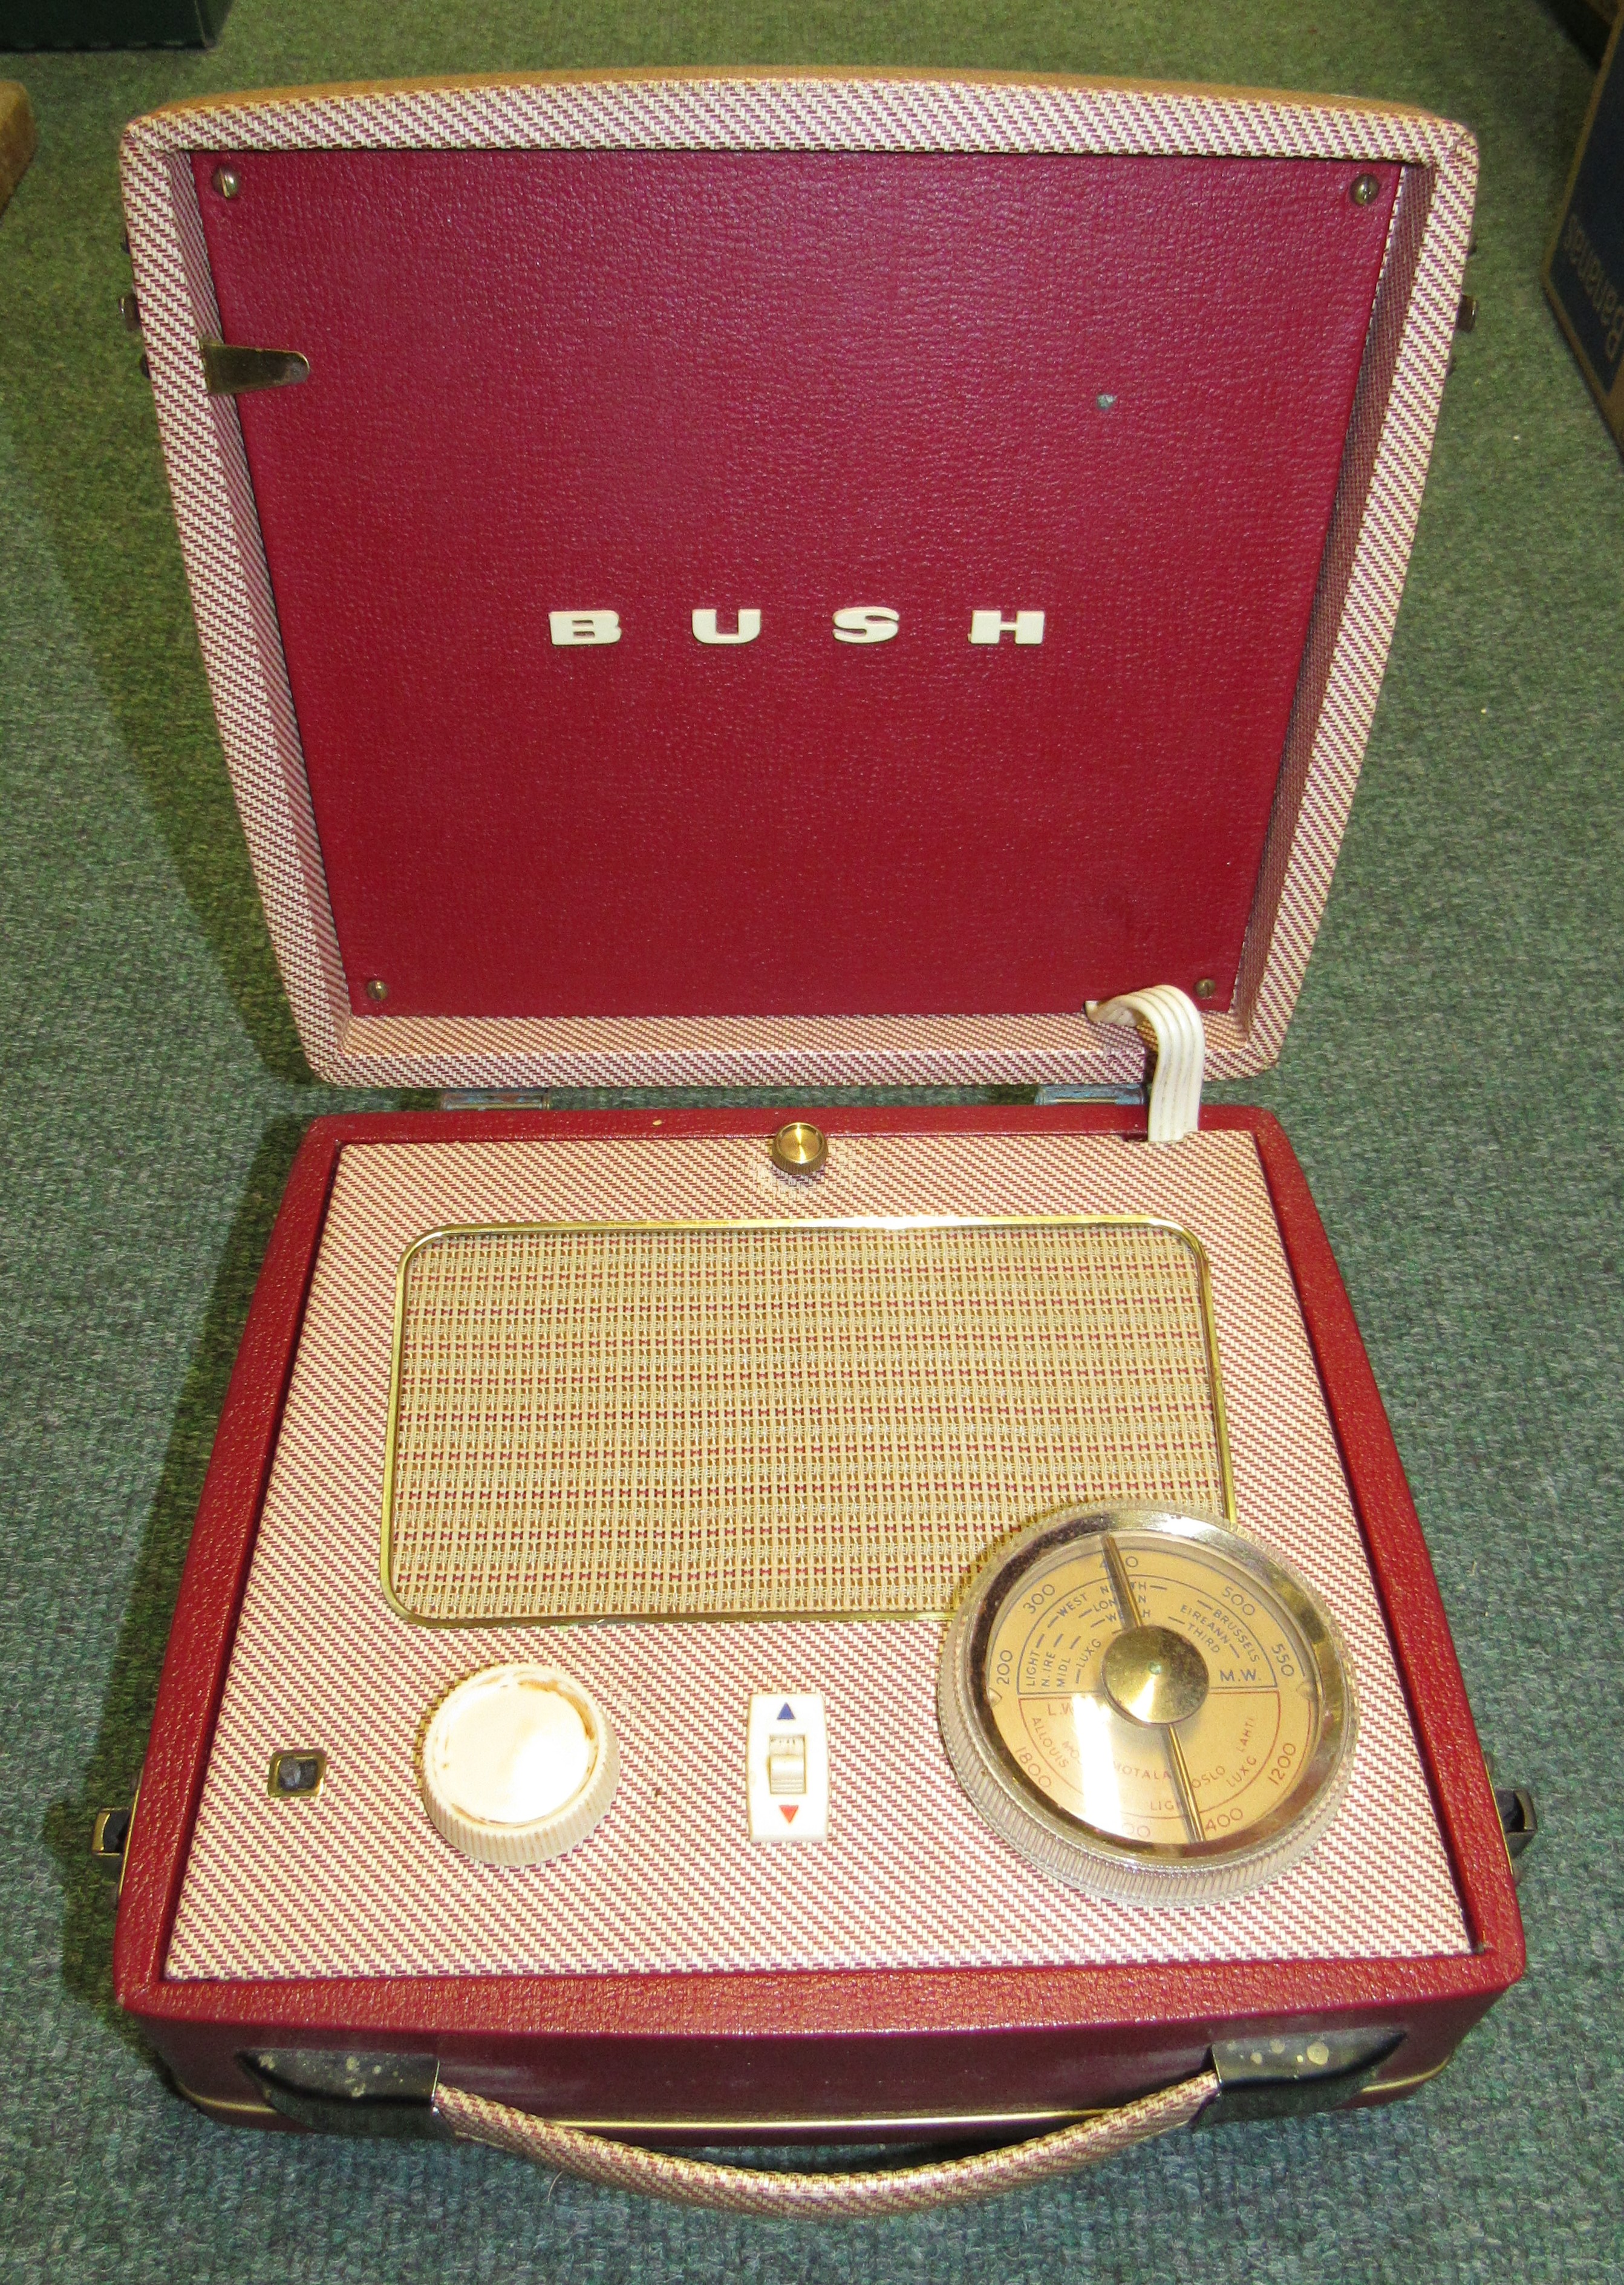 A Bush portable radio - early 1960s ish. Not tested.